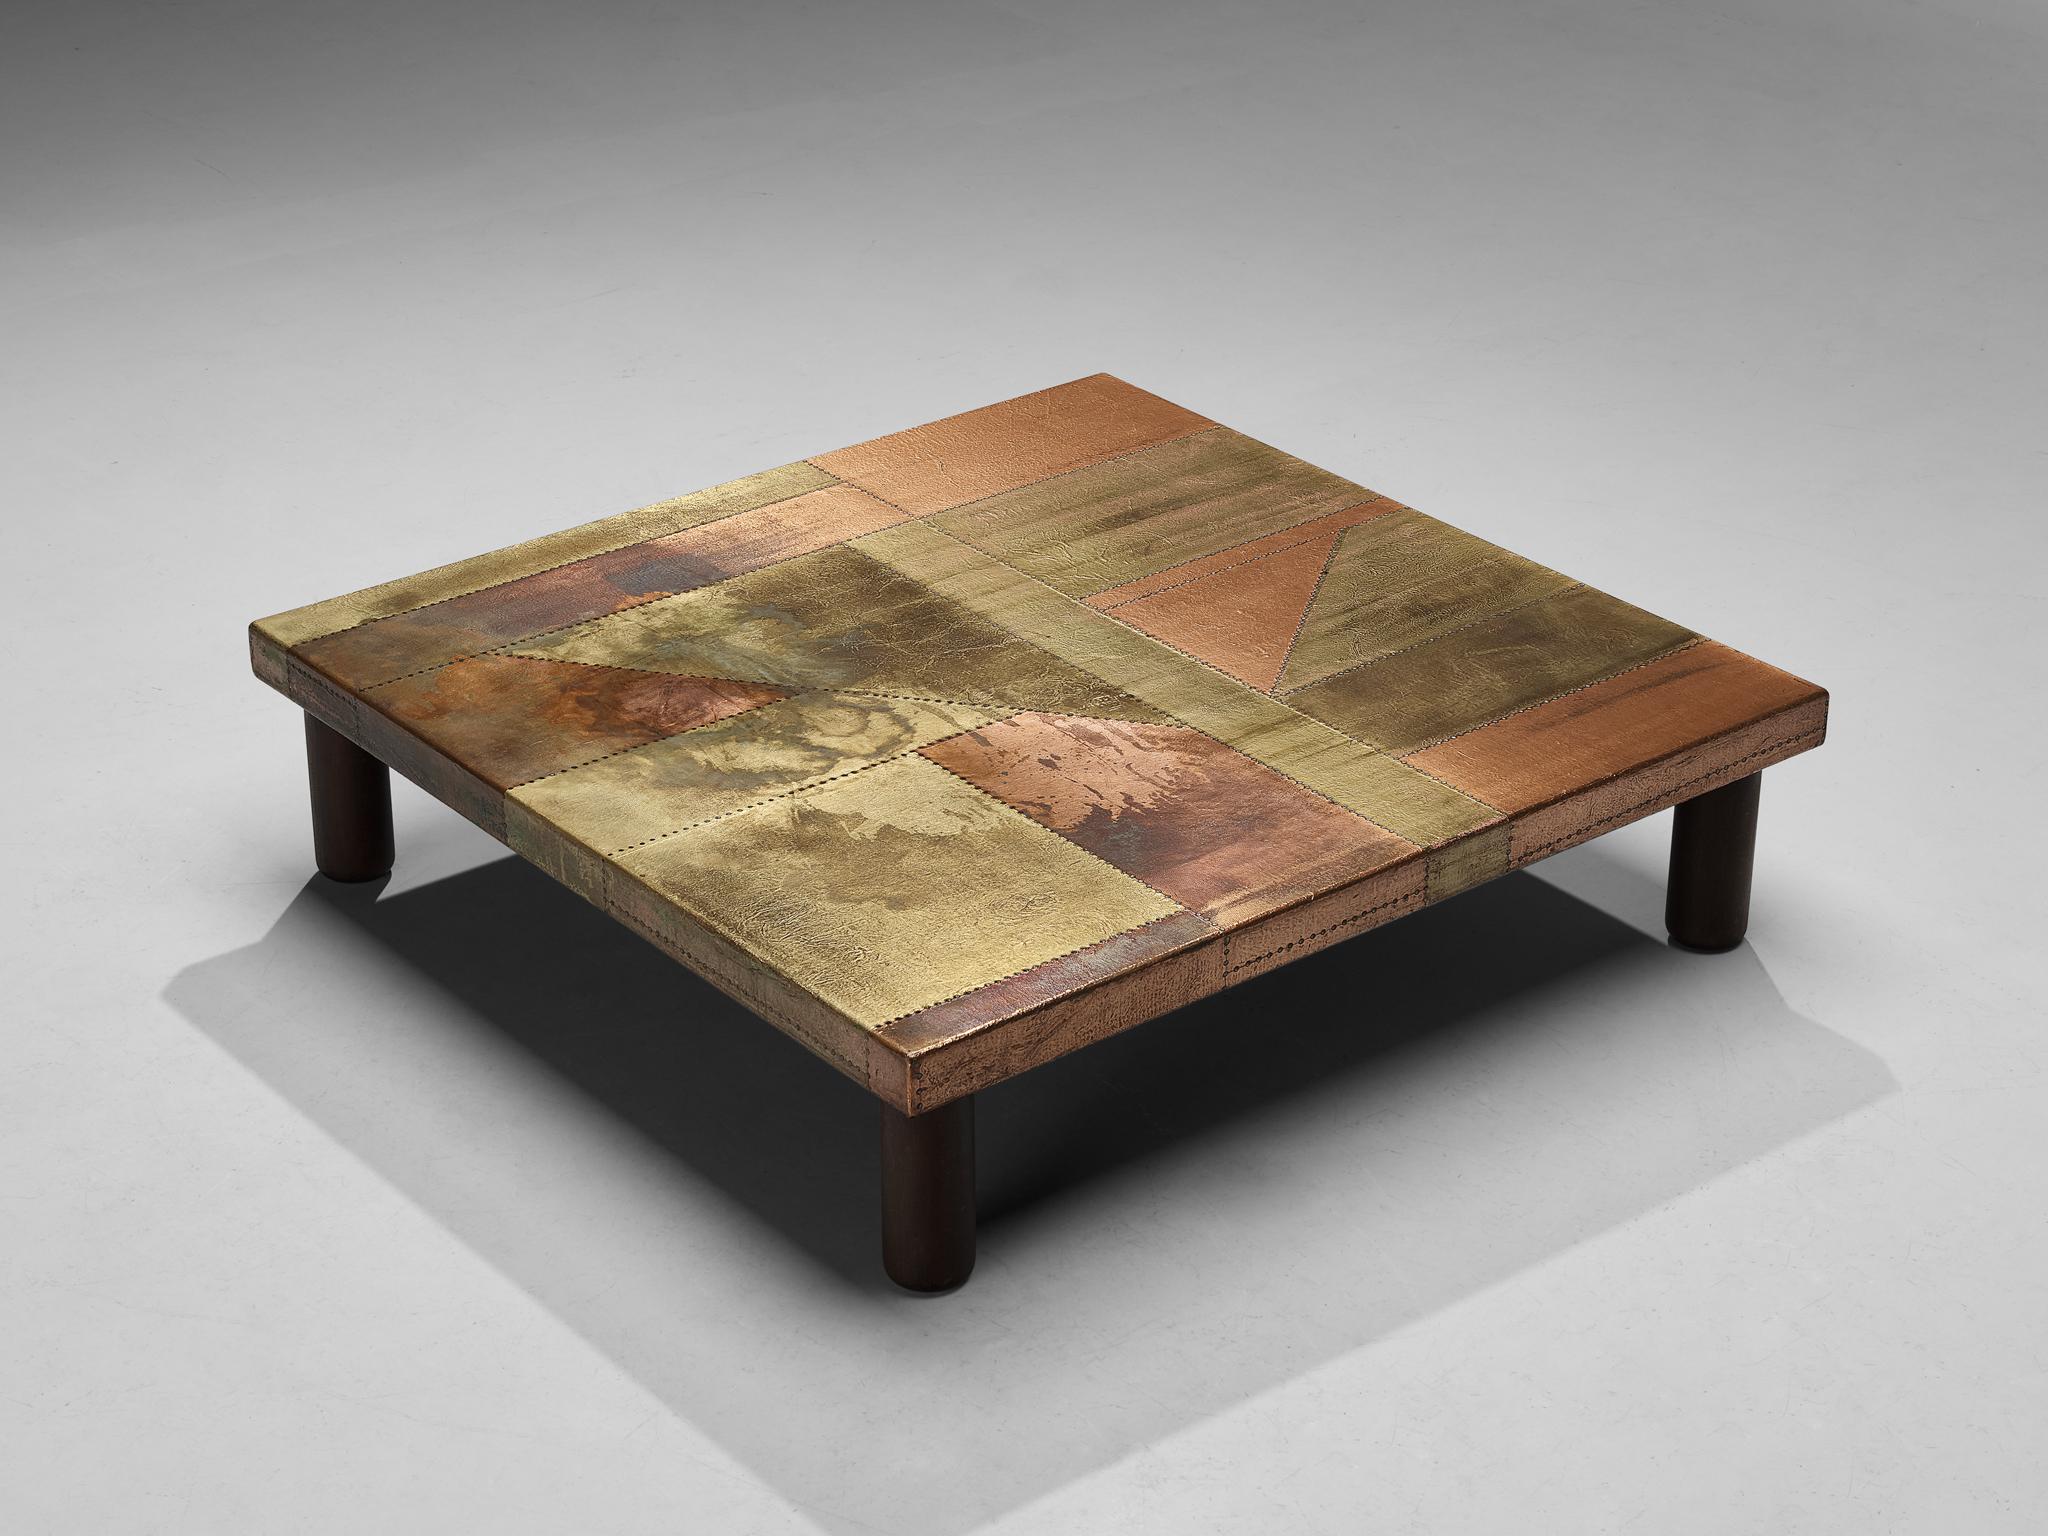 Lorenzo Burchiellaro, coffee table, copper and wood, Italy, 1960s.

This coffee table is an absolute eye-catcher. The copper is in beautiful, patinated condition and the vibrant yet natural oxidation and golden color is something out of this world.